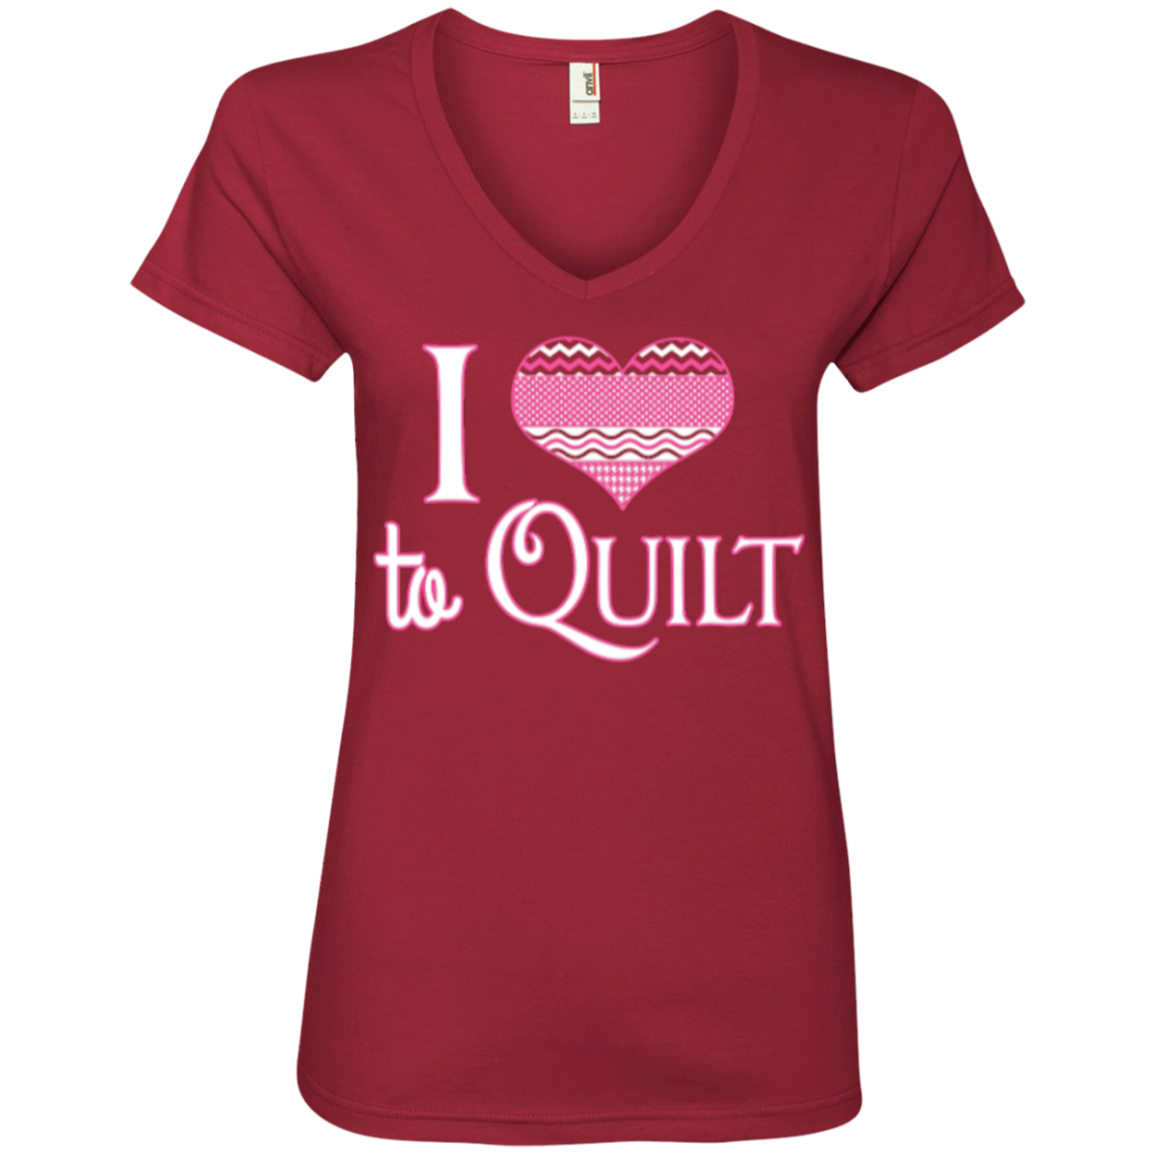 I Heart to Quilt Ladies V-neck Tee - Crafter4Life - 6